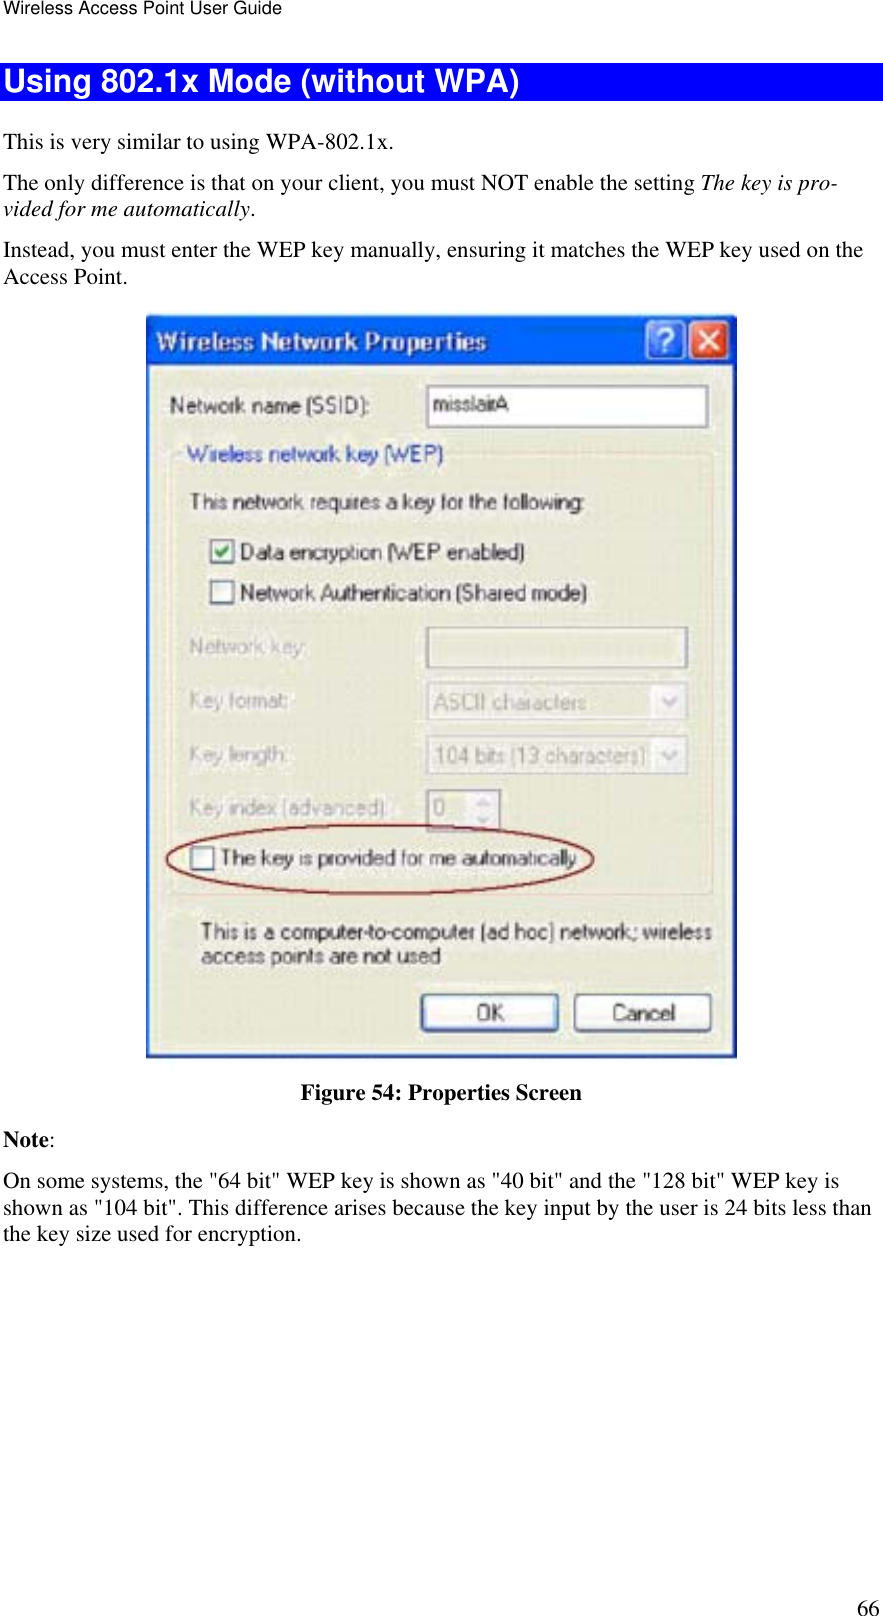 Wireless Access Point User Guide 66 Using 802.1x Mode (without WPA) This is very similar to using WPA-802.1x. The only difference is that on your client, you must NOT enable the setting The key is pro-vided for me automatically. Instead, you must enter the WEP key manually, ensuring it matches the WEP key used on the Access Point.  Figure 54: Properties Screen Note:  On some systems, the &quot;64 bit&quot; WEP key is shown as &quot;40 bit&quot; and the &quot;128 bit&quot; WEP key is shown as &quot;104 bit&quot;. This difference arises because the key input by the user is 24 bits less than the key size used for encryption.  